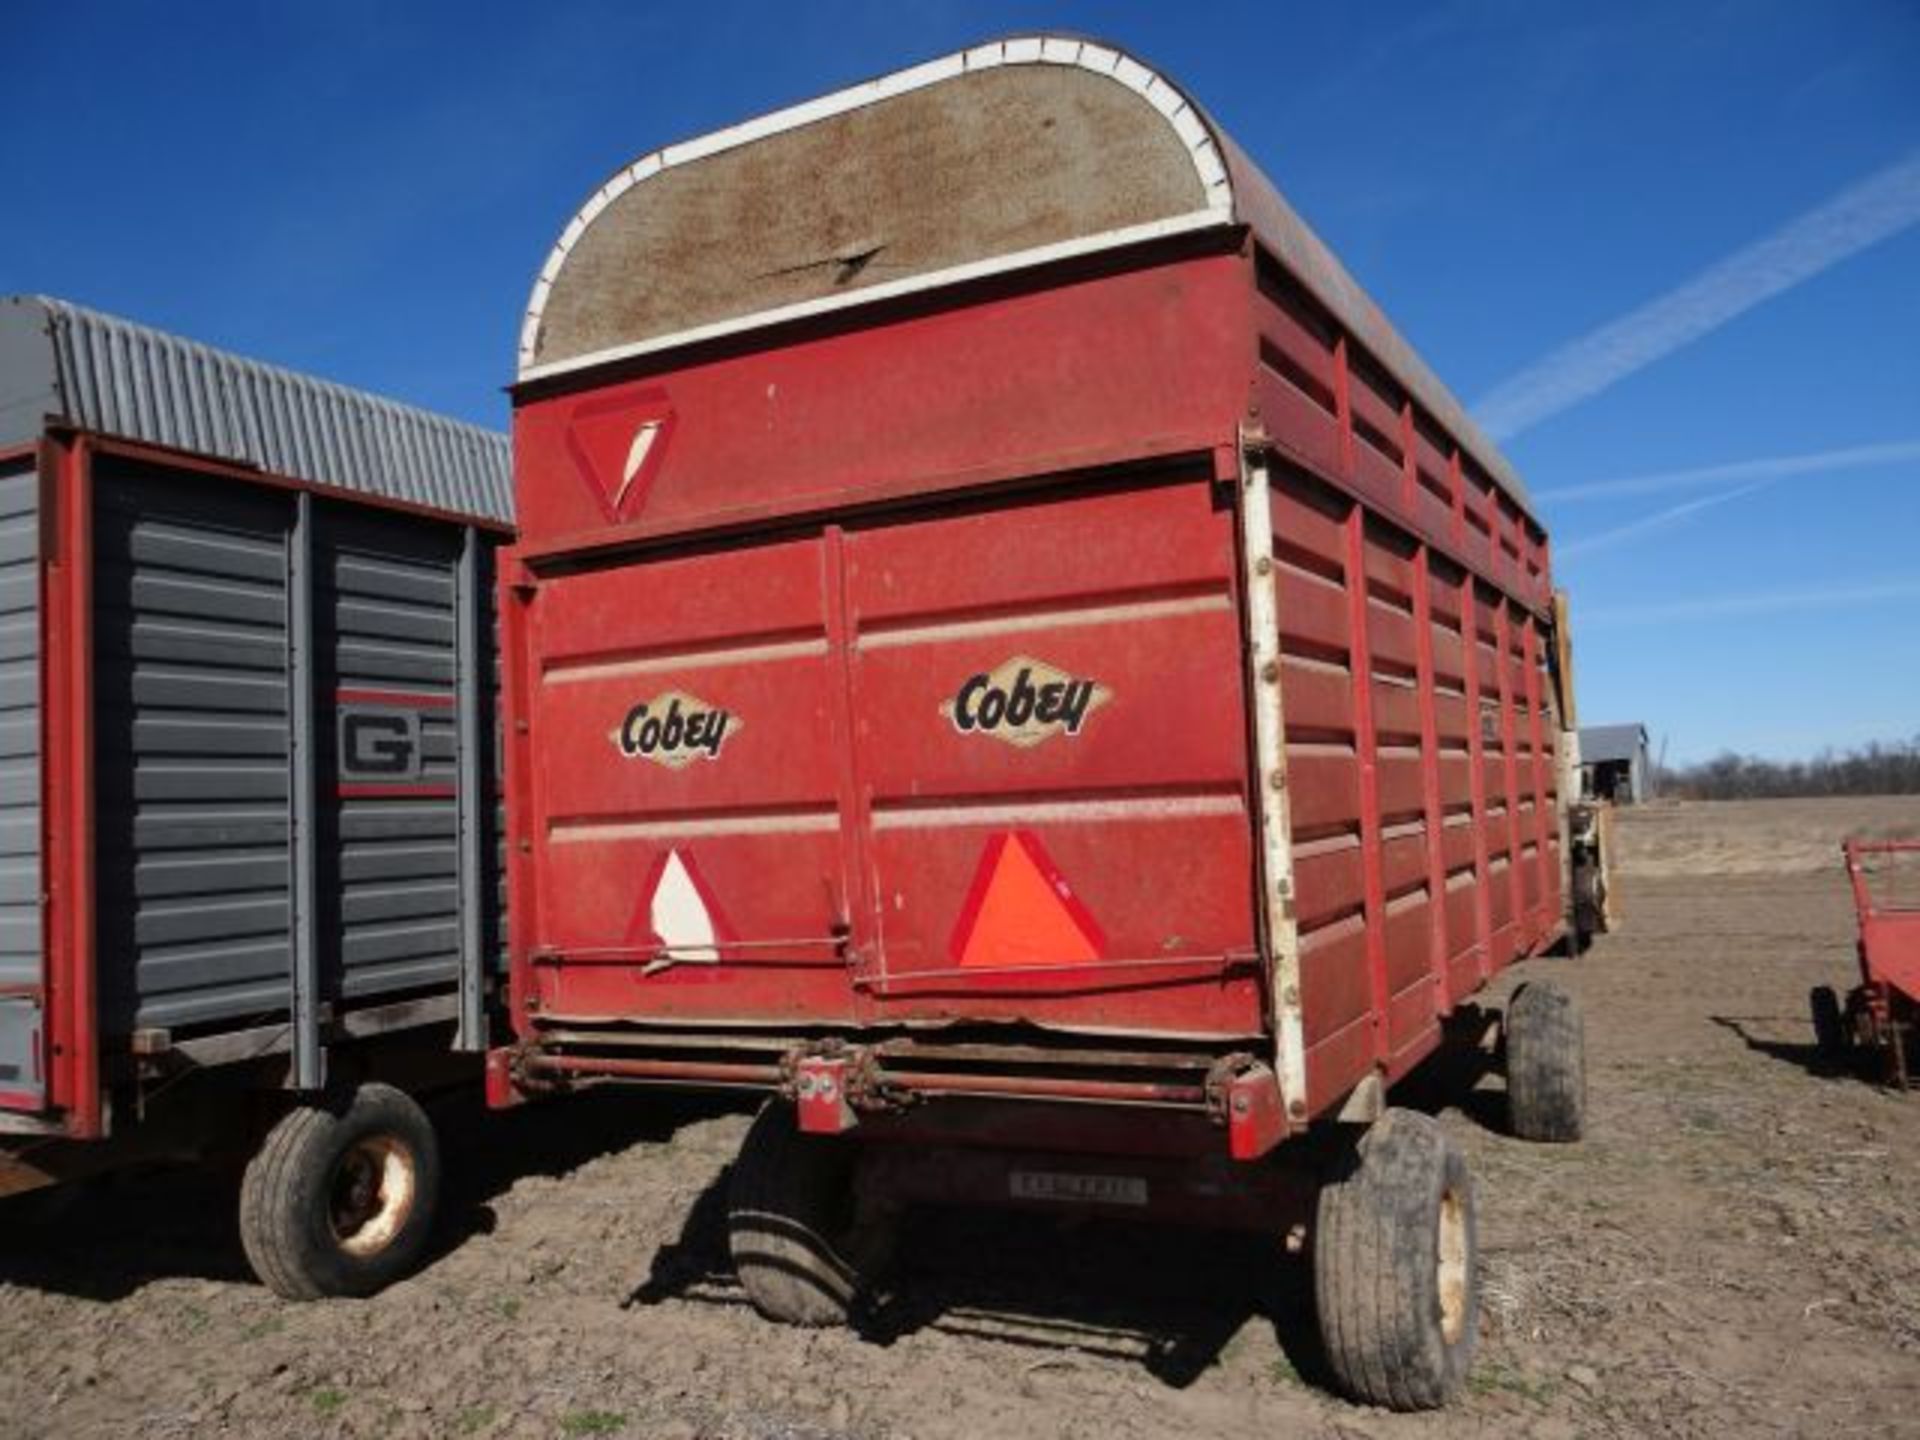 Cobey Covered Silage Wagon - Image 2 of 4